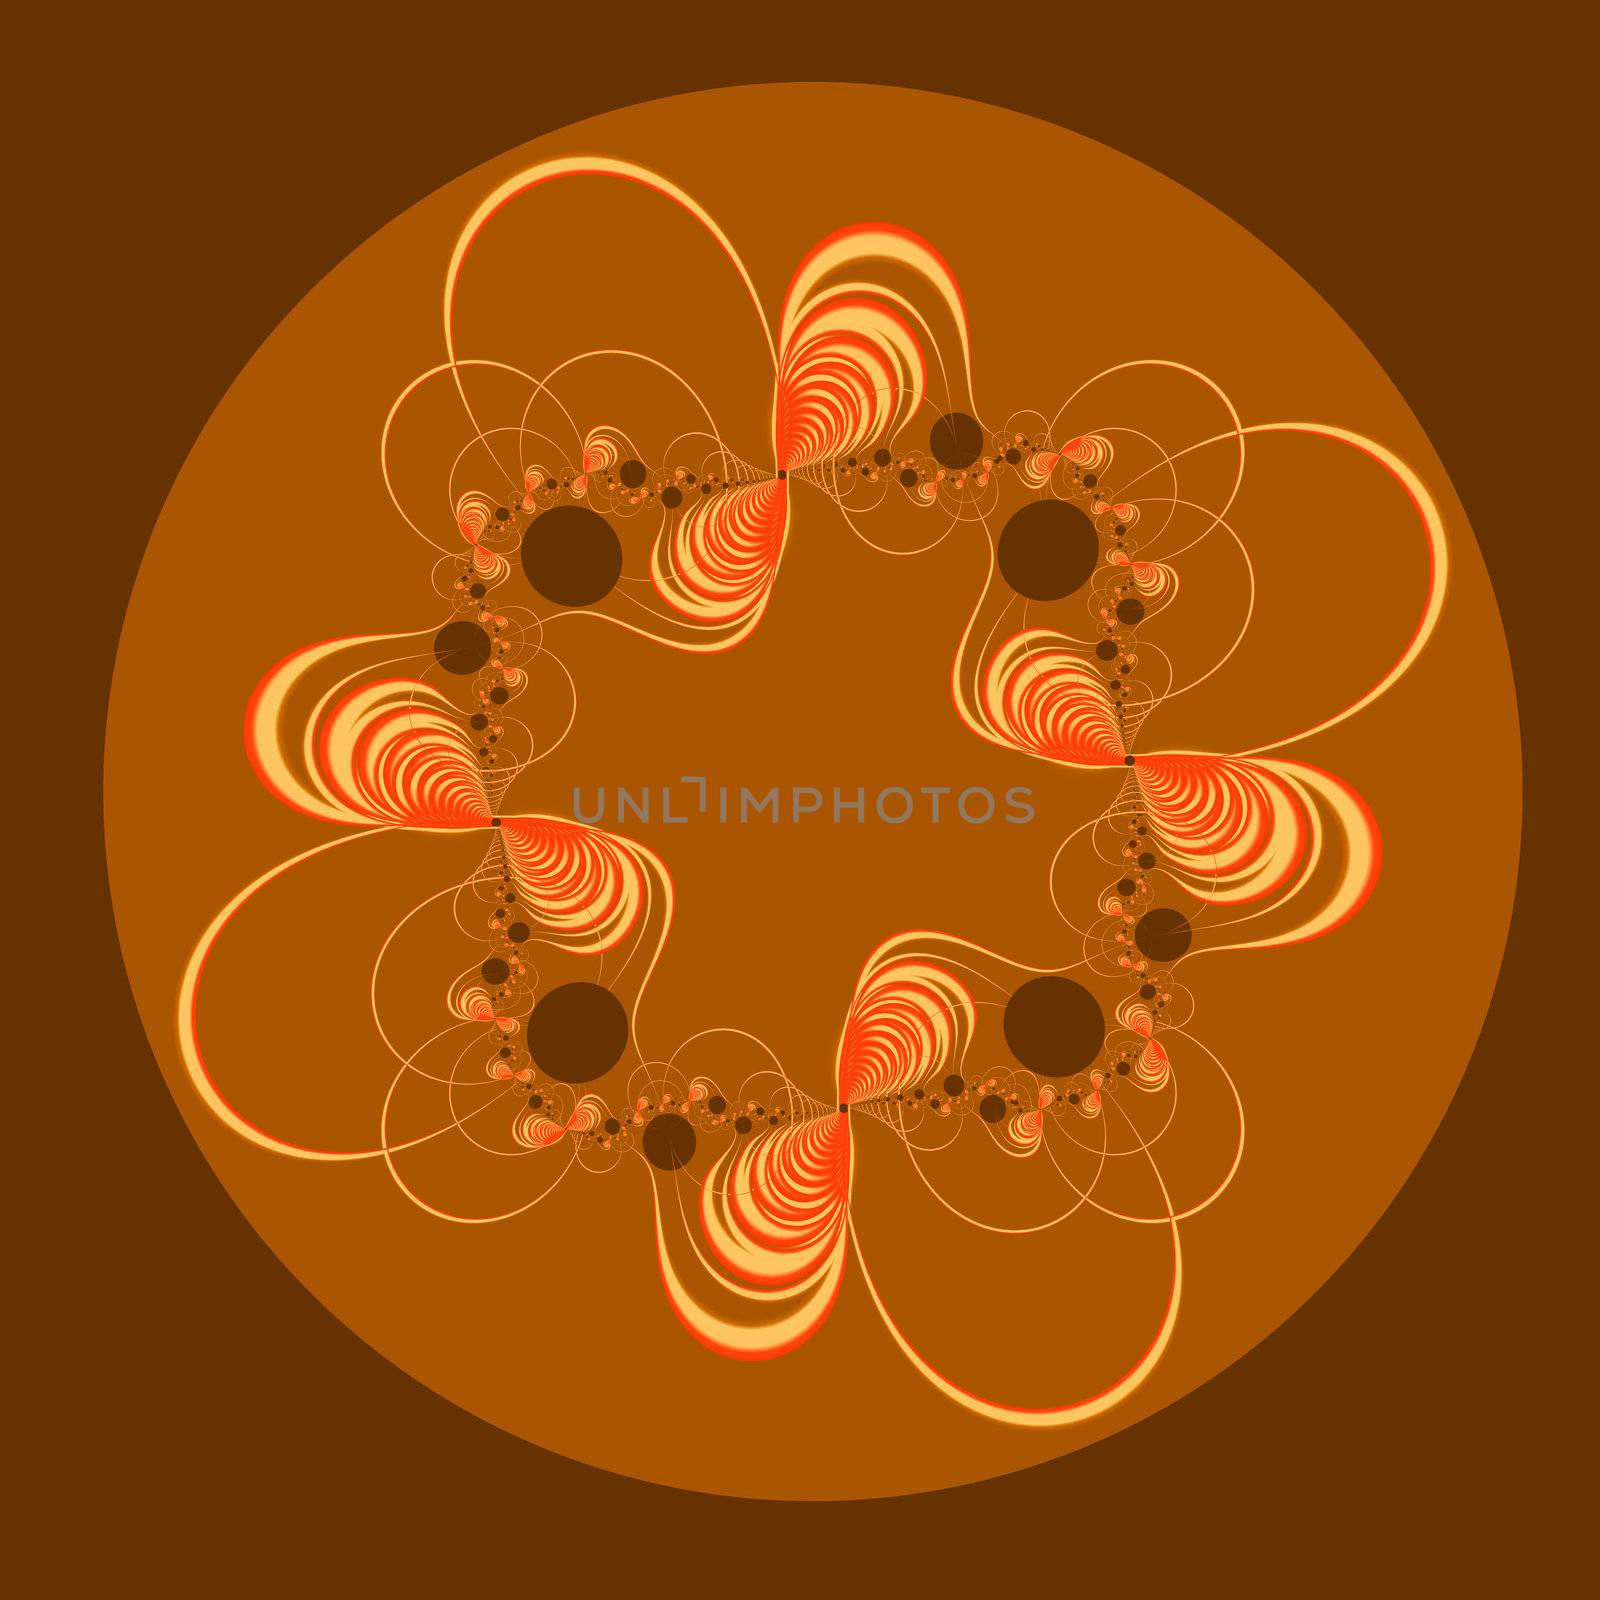 An abstract fractal done in warm shades of yellow, orange, and brown.